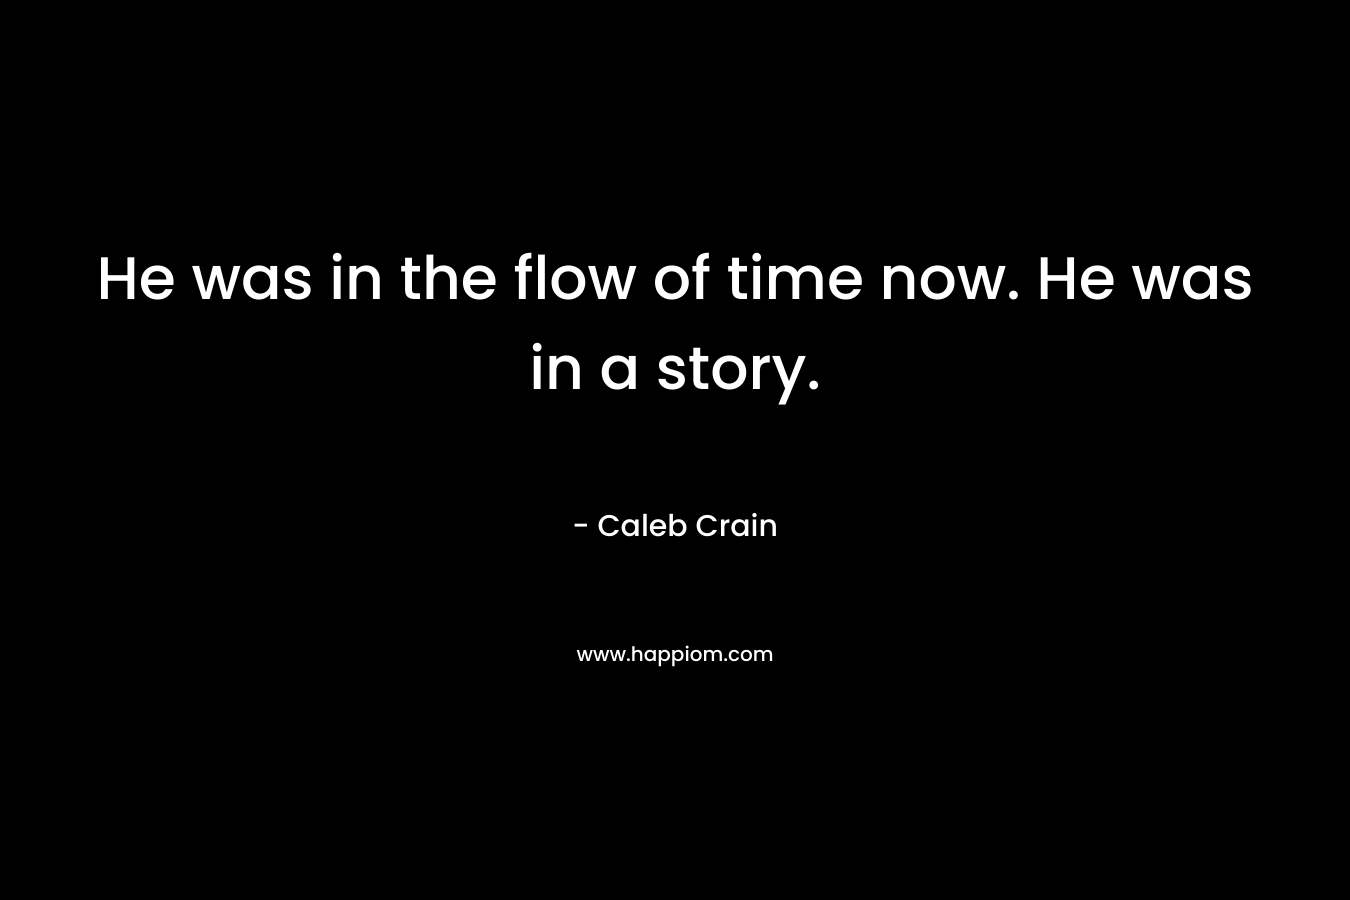 He was in the flow of time now. He was in a story. – Caleb Crain